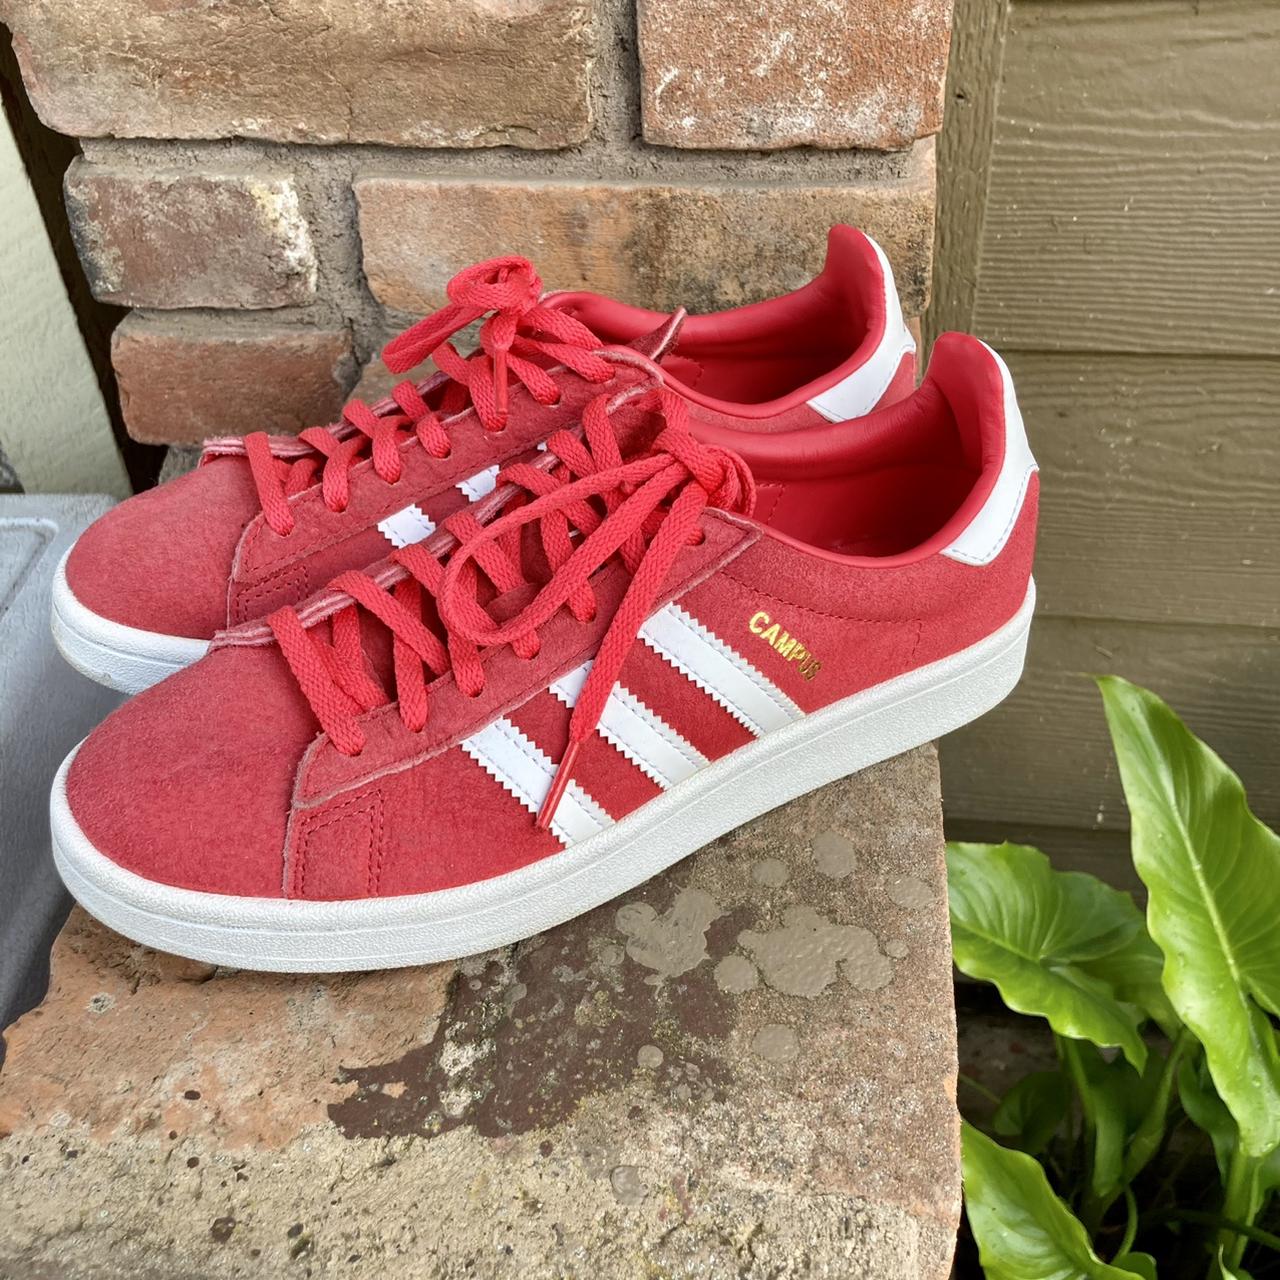 Product Image 1 - Cherry red campus kicks. Tag